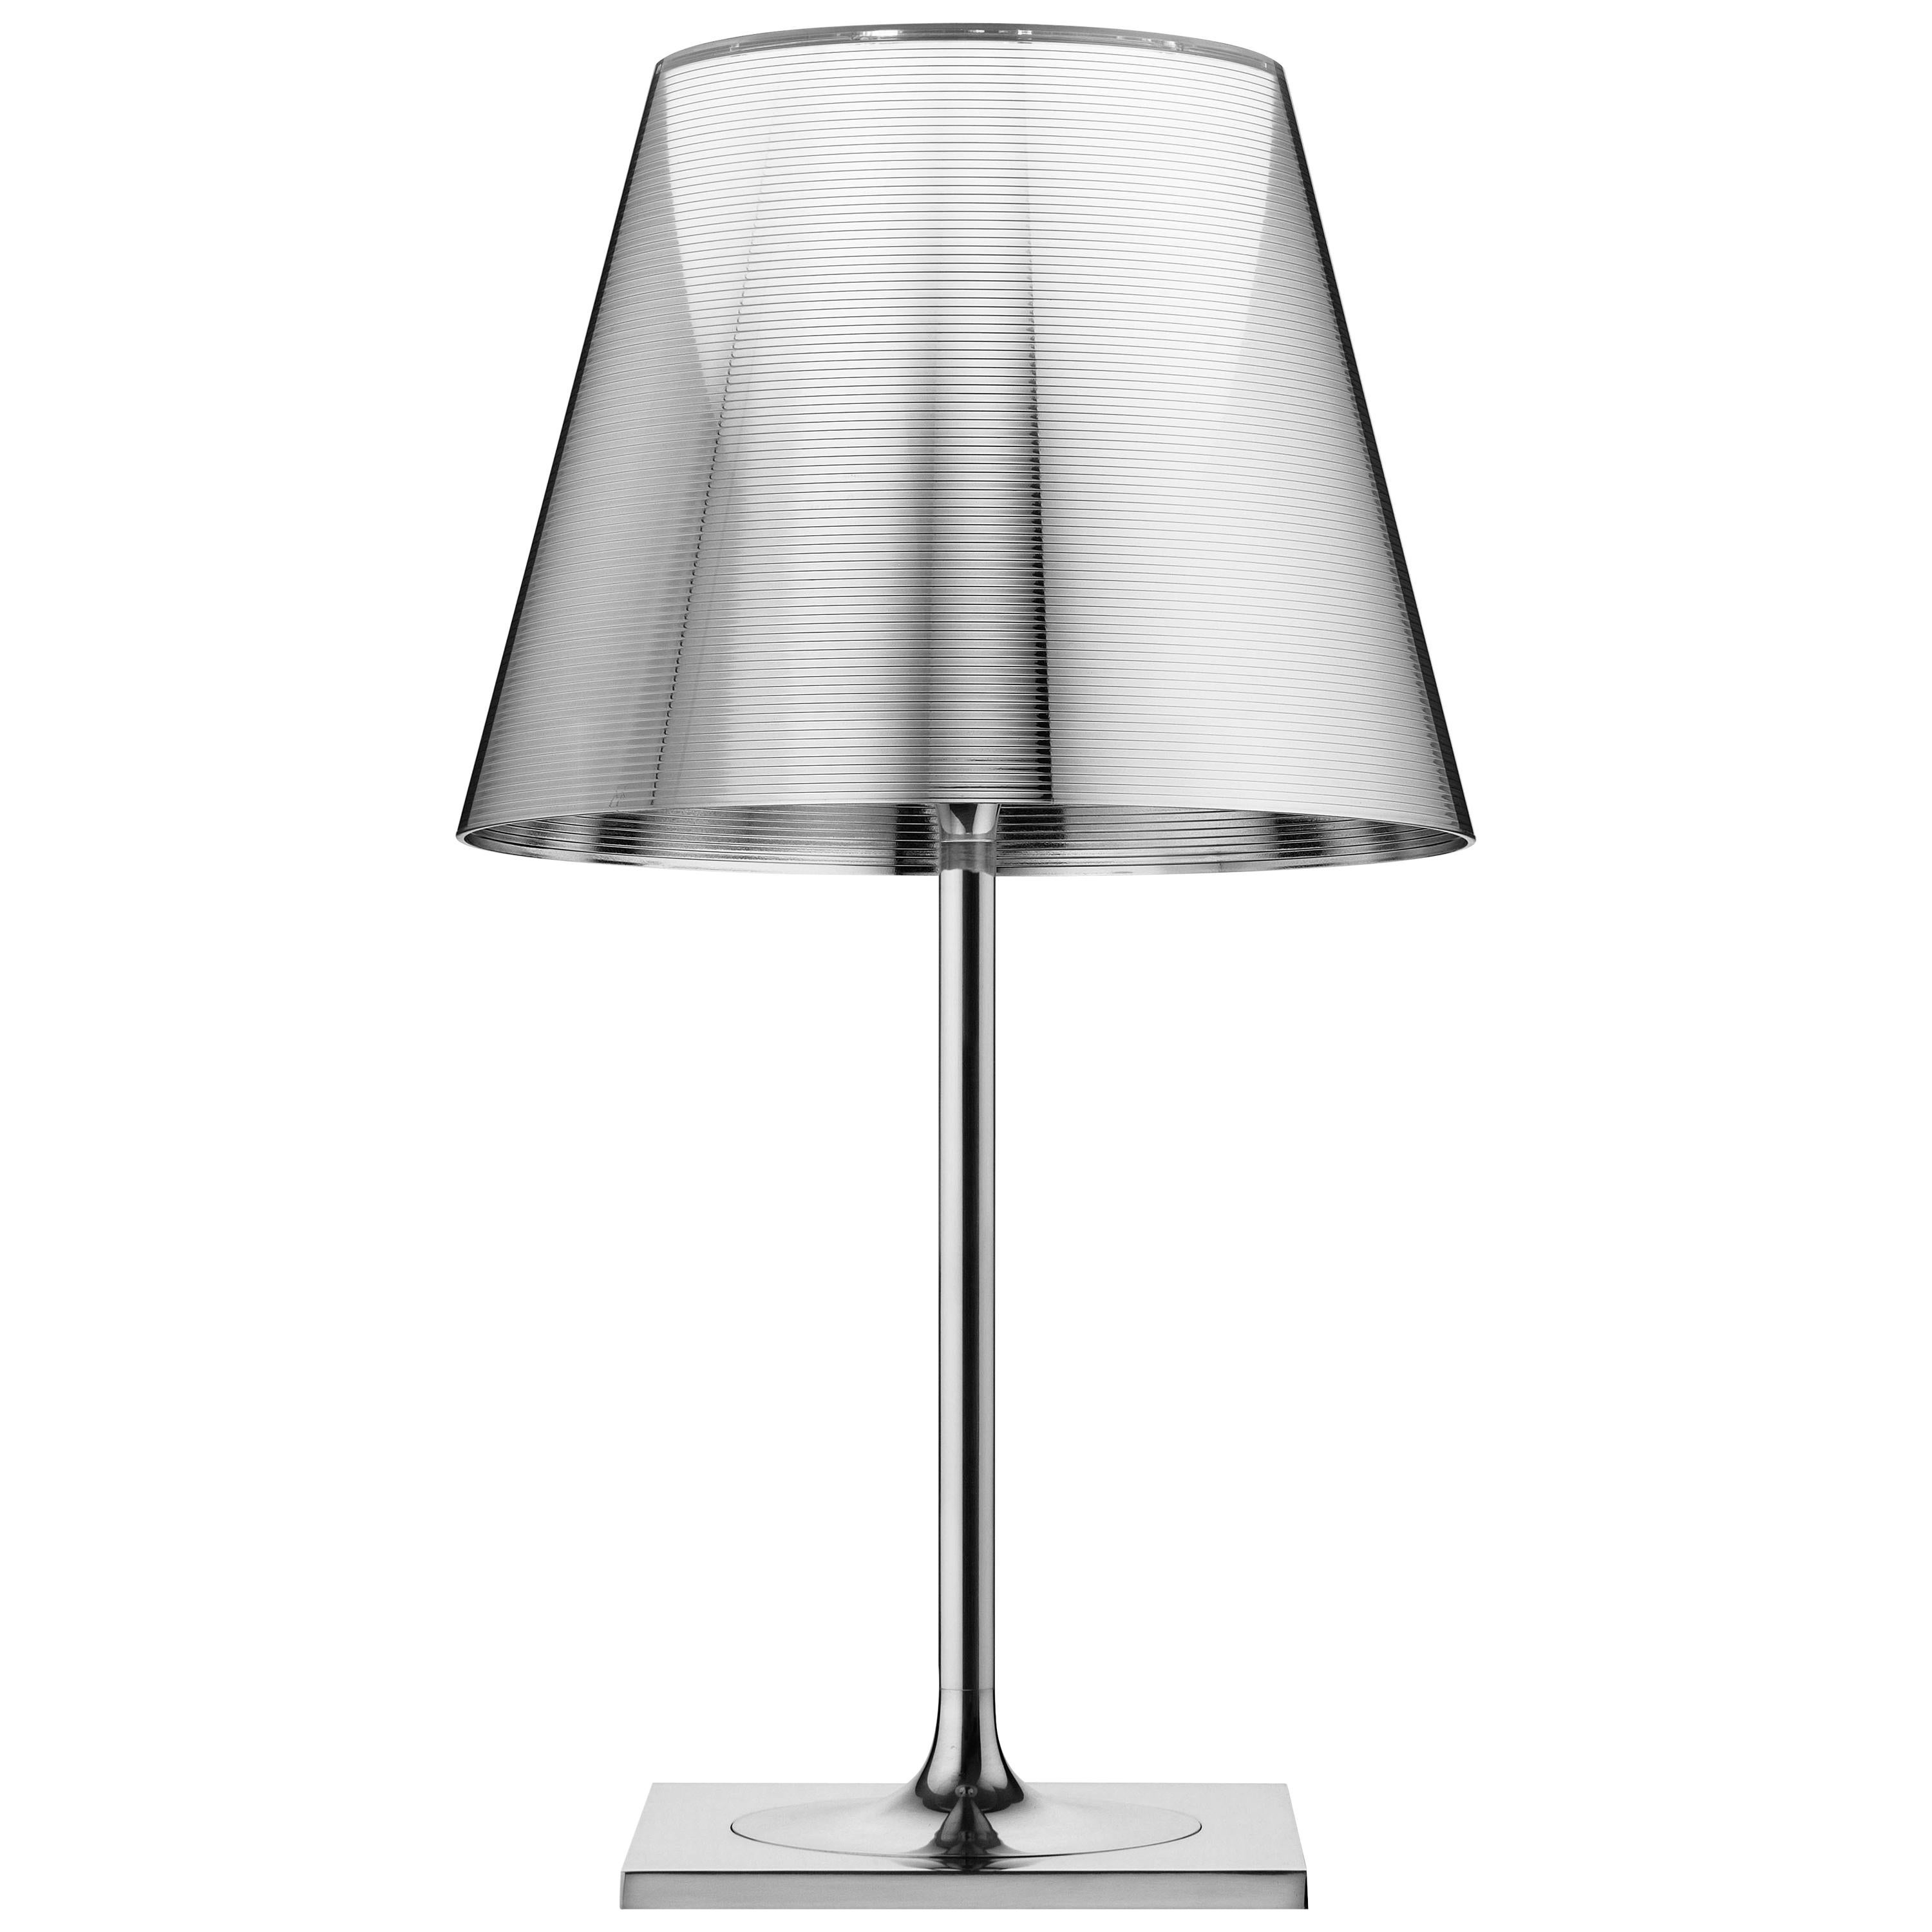 FLOS Ktribe T2 Halogen Table Lamp in Aluminized Silver by Philippe Starck